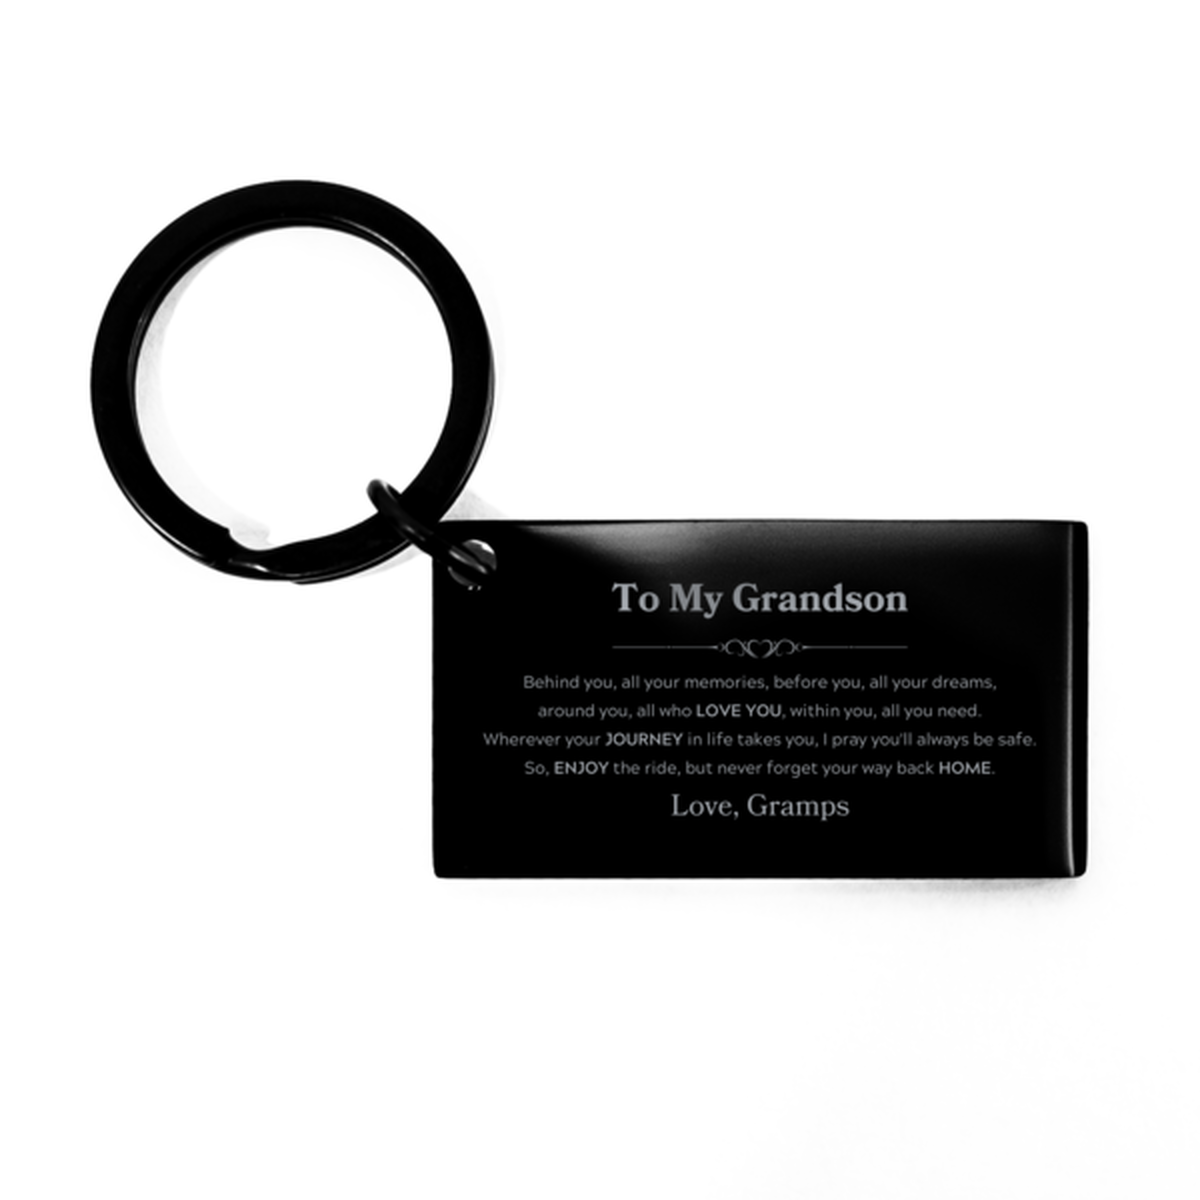 To My Grandson Graduation Gifts from Gramps, Grandson Keychain Christmas Birthday Gifts for Grandson Behind you, all your memories, before you, all your dreams. Love, Gramps